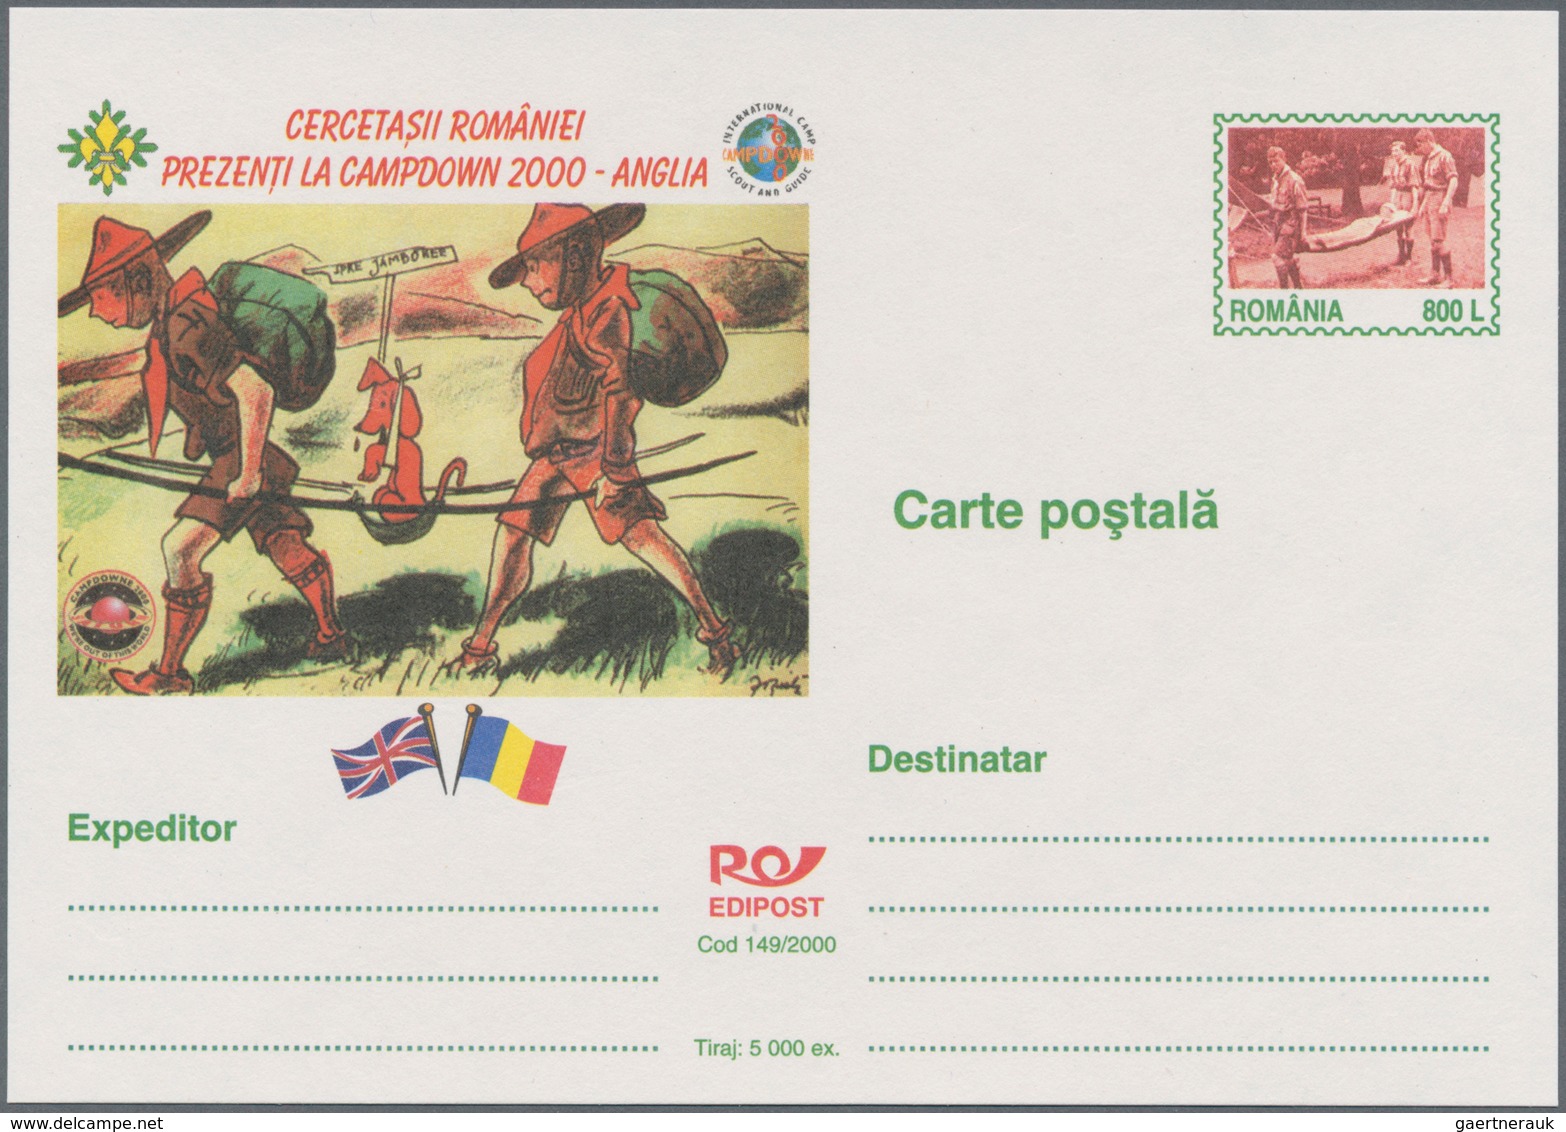 Rumänien - Ganzsachen: 2000 Ca. 650 Unused Postal Stationery Cards And Envelopes, Mostly With Specia - Postal Stationery